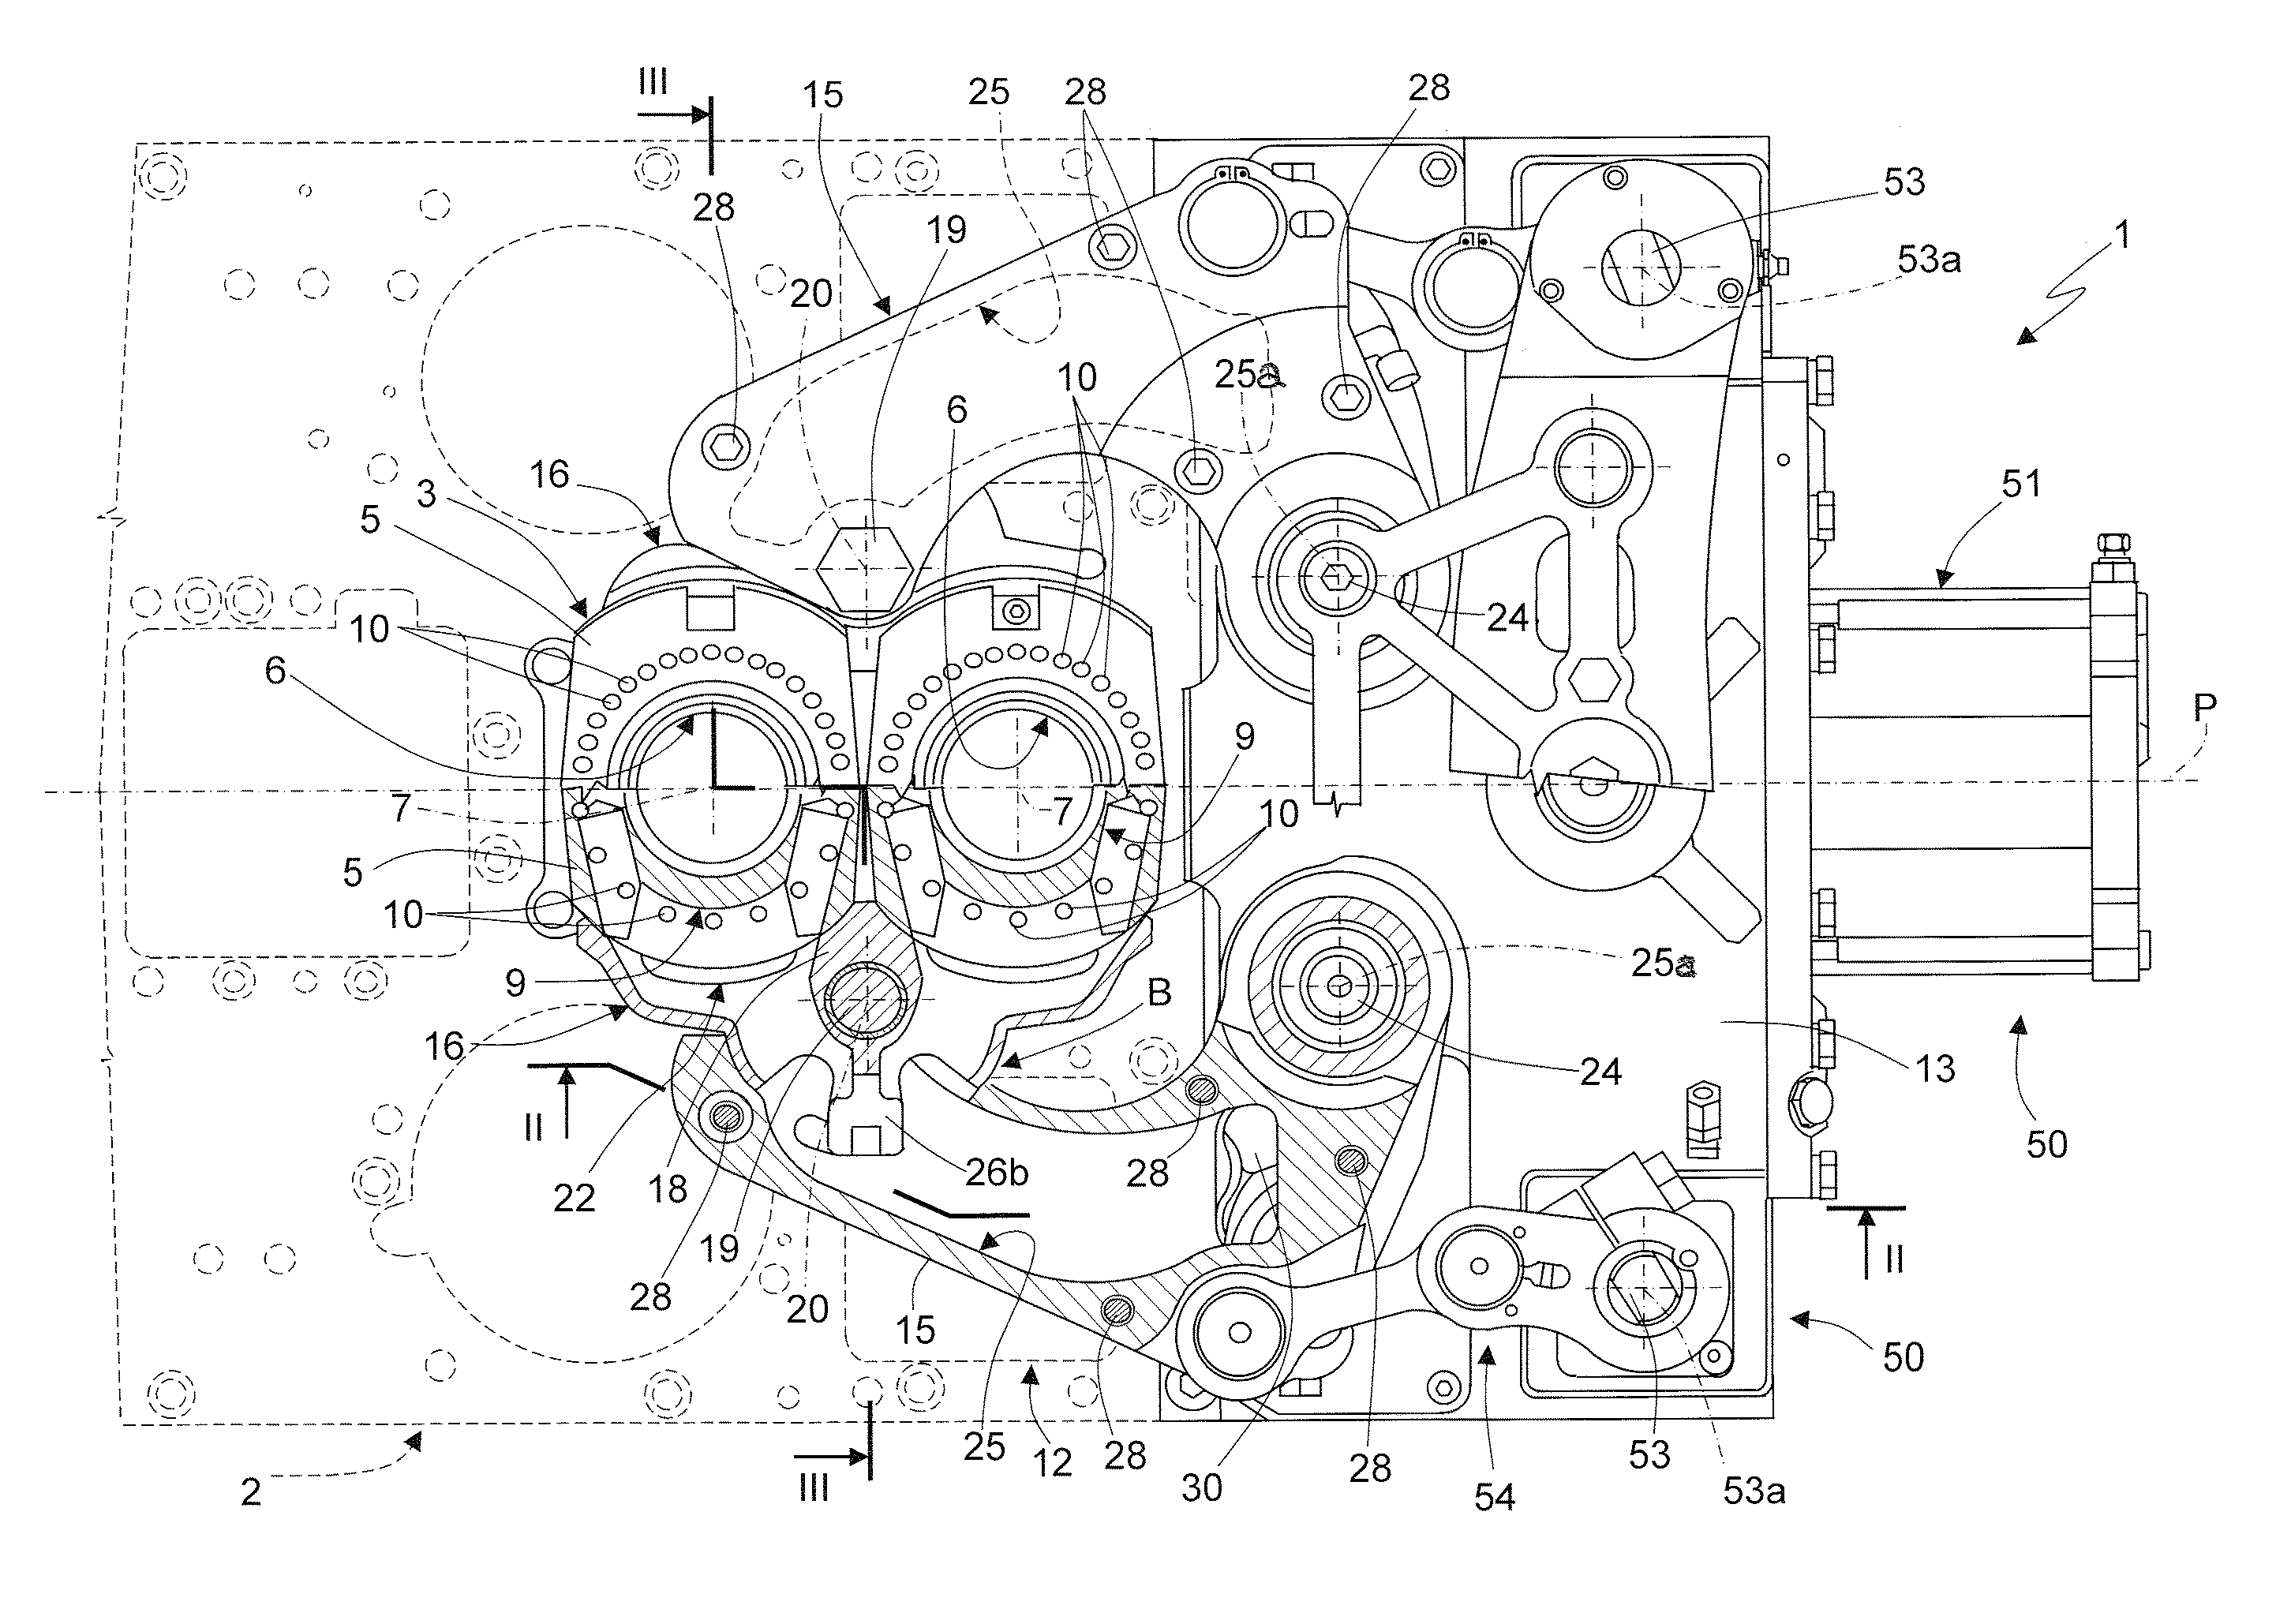 Mold actuating and cooling assembly for a glassware molding machine